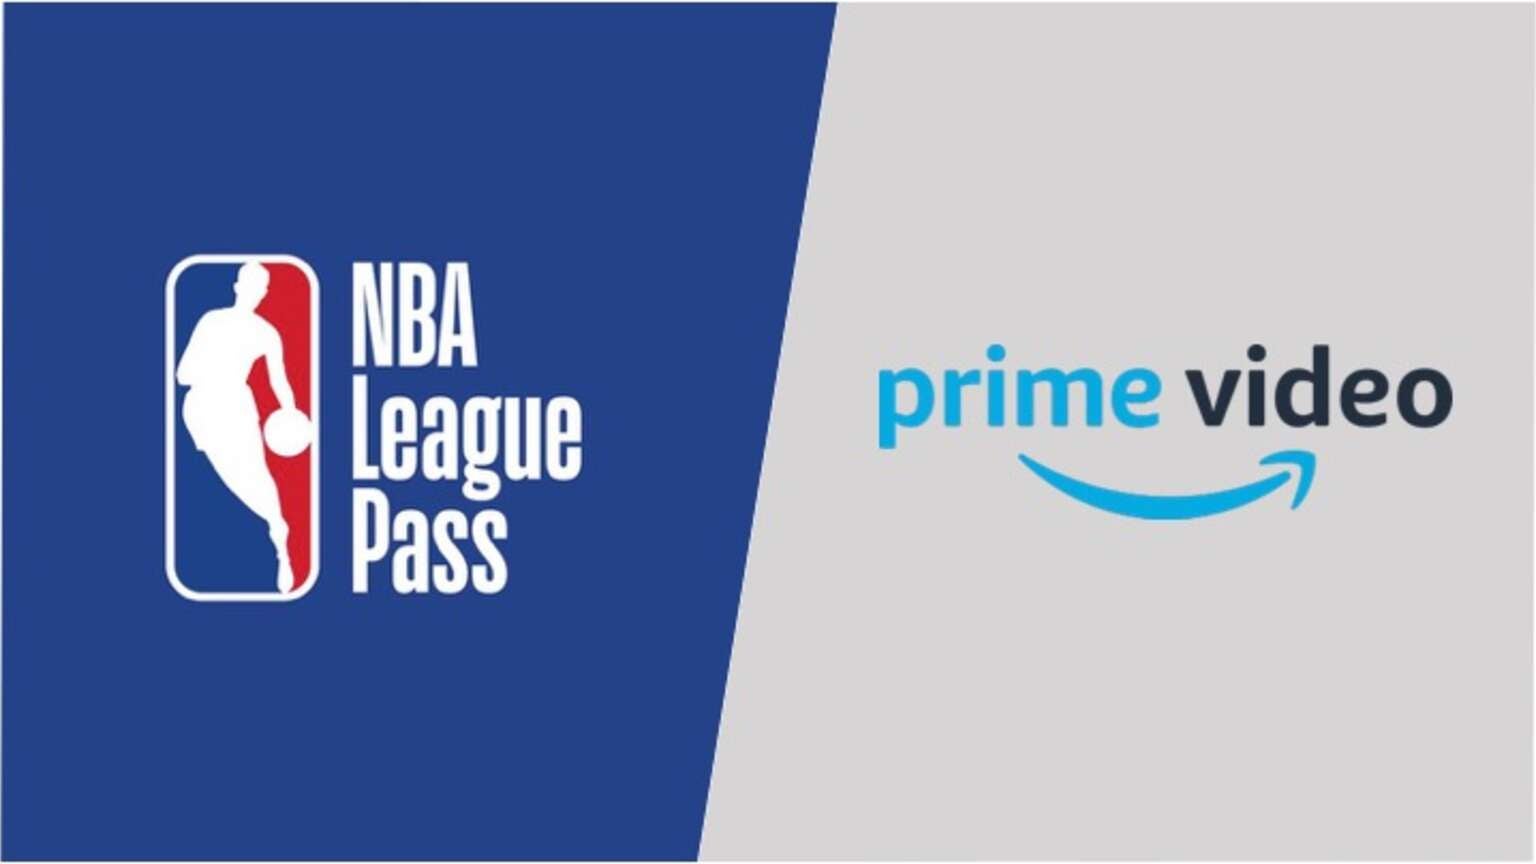 Amazon Prime Video Offering Free Trial of NBA League Pass ...